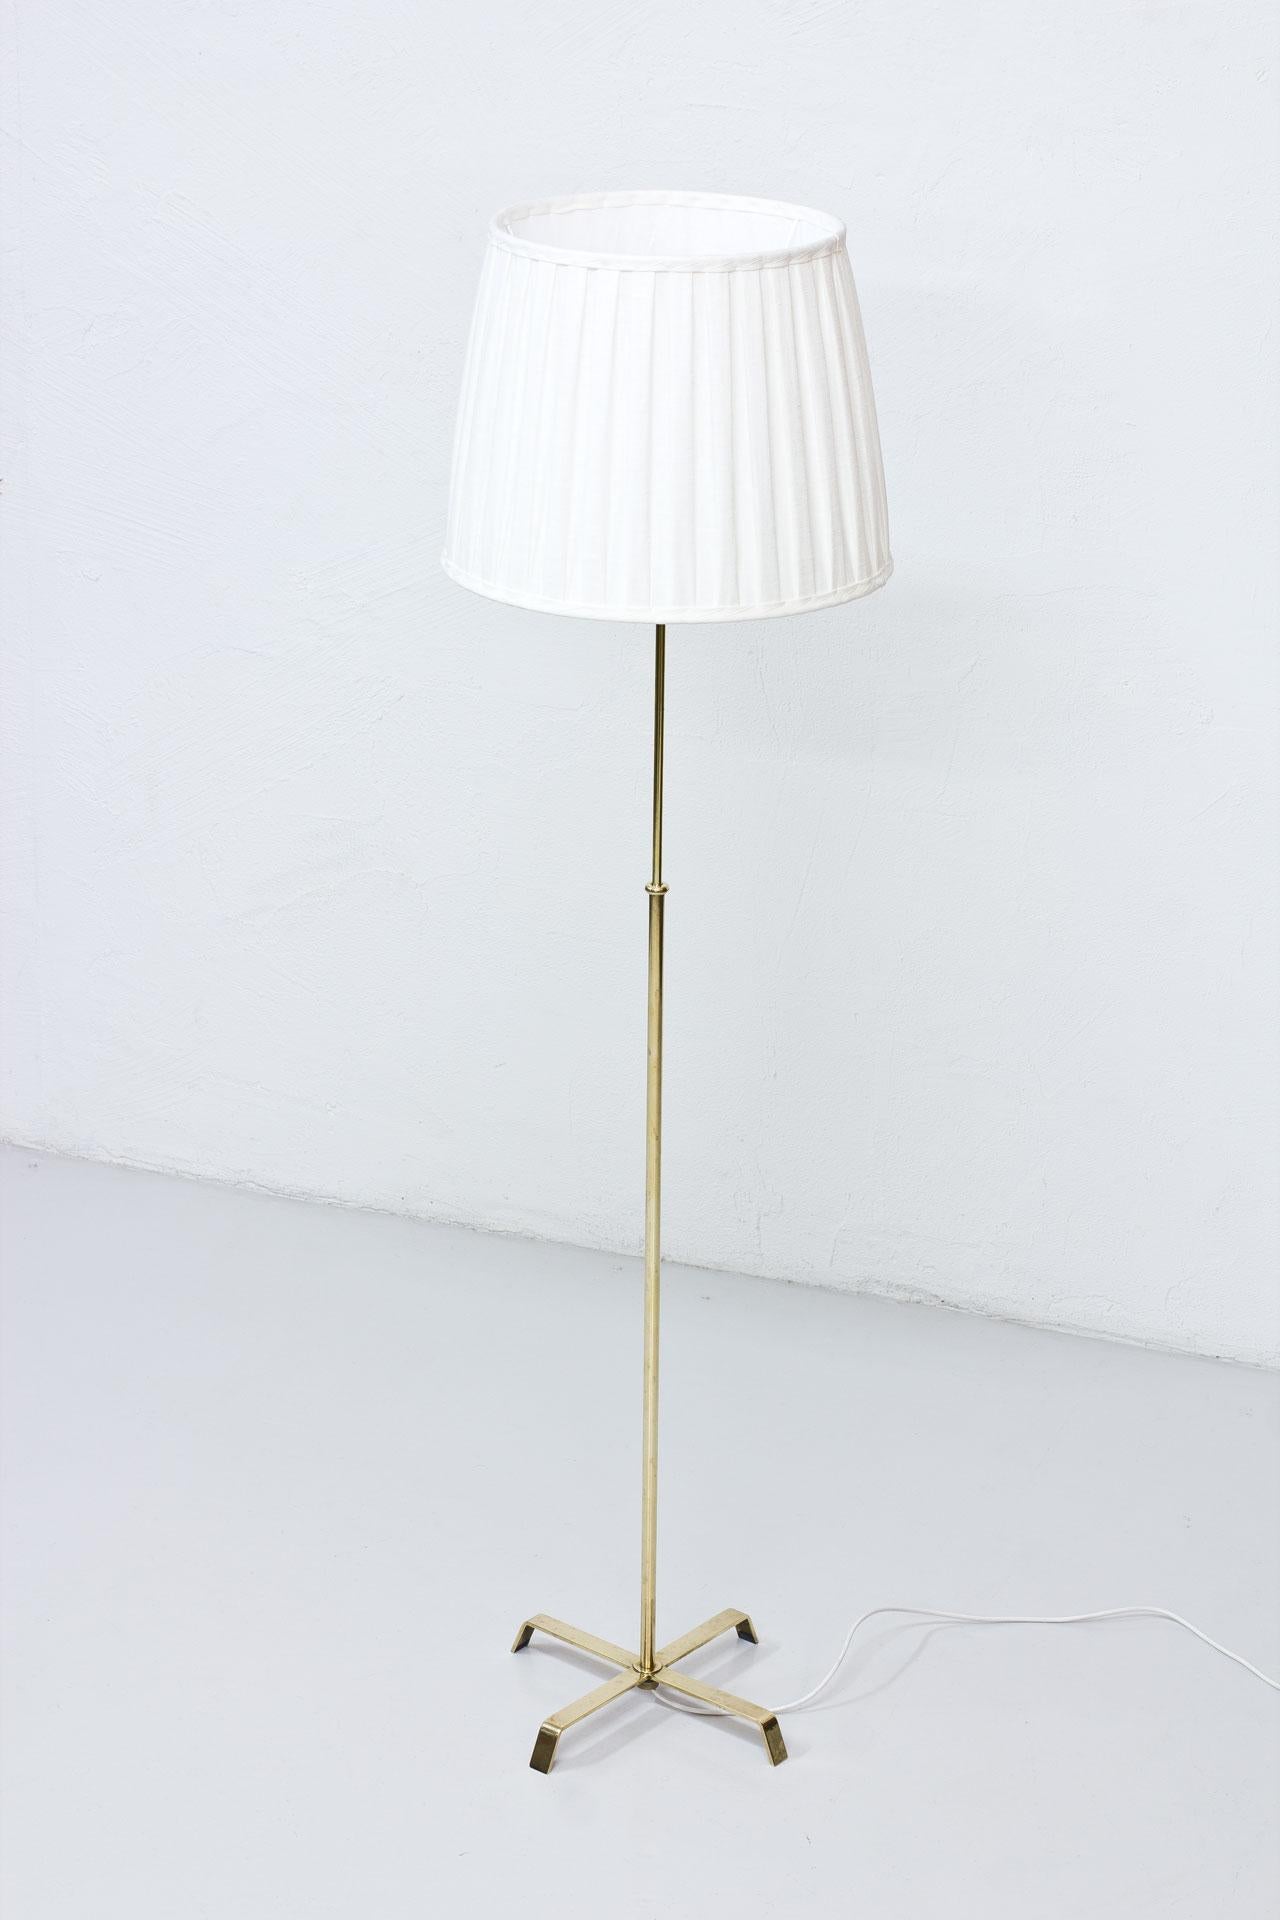 Floor lamp manufactured in Sweden by Böhlmarks lamp fabric during the 1940s. Made from brass with hand pleated lamp shade in linen fabric. Adjustable height of the stem. Engraved on the base.